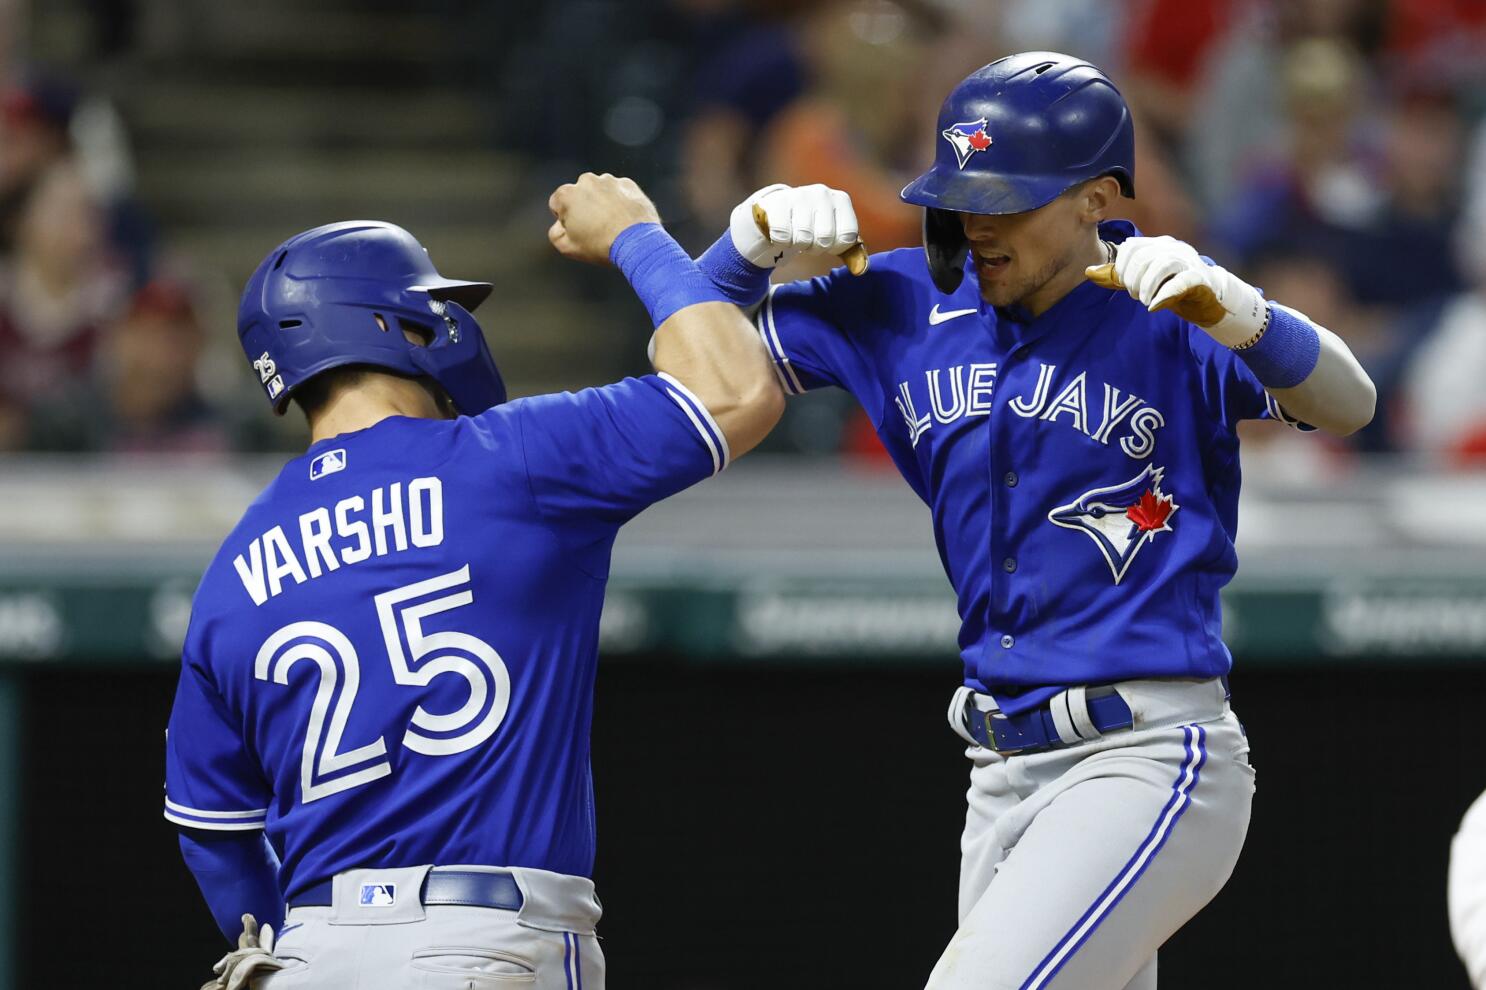 Toronto Blue Jays in thick of playoff race entering final week of